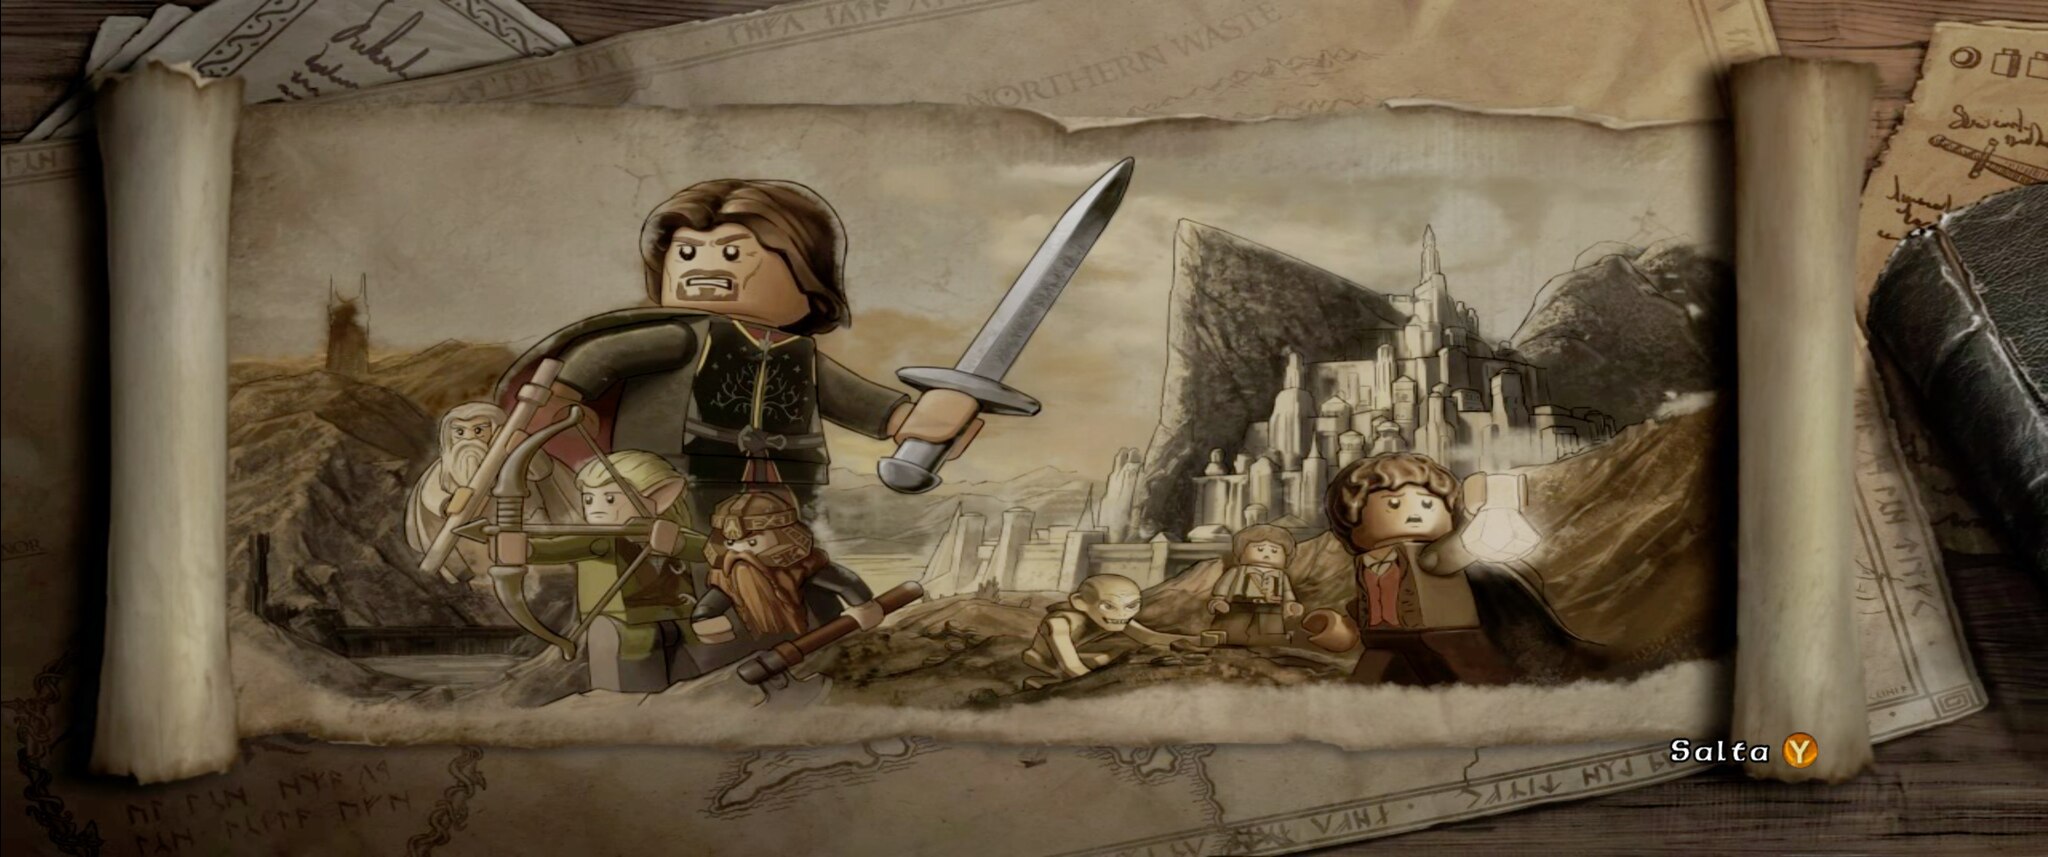 lego lord of the rings codes xbox 360